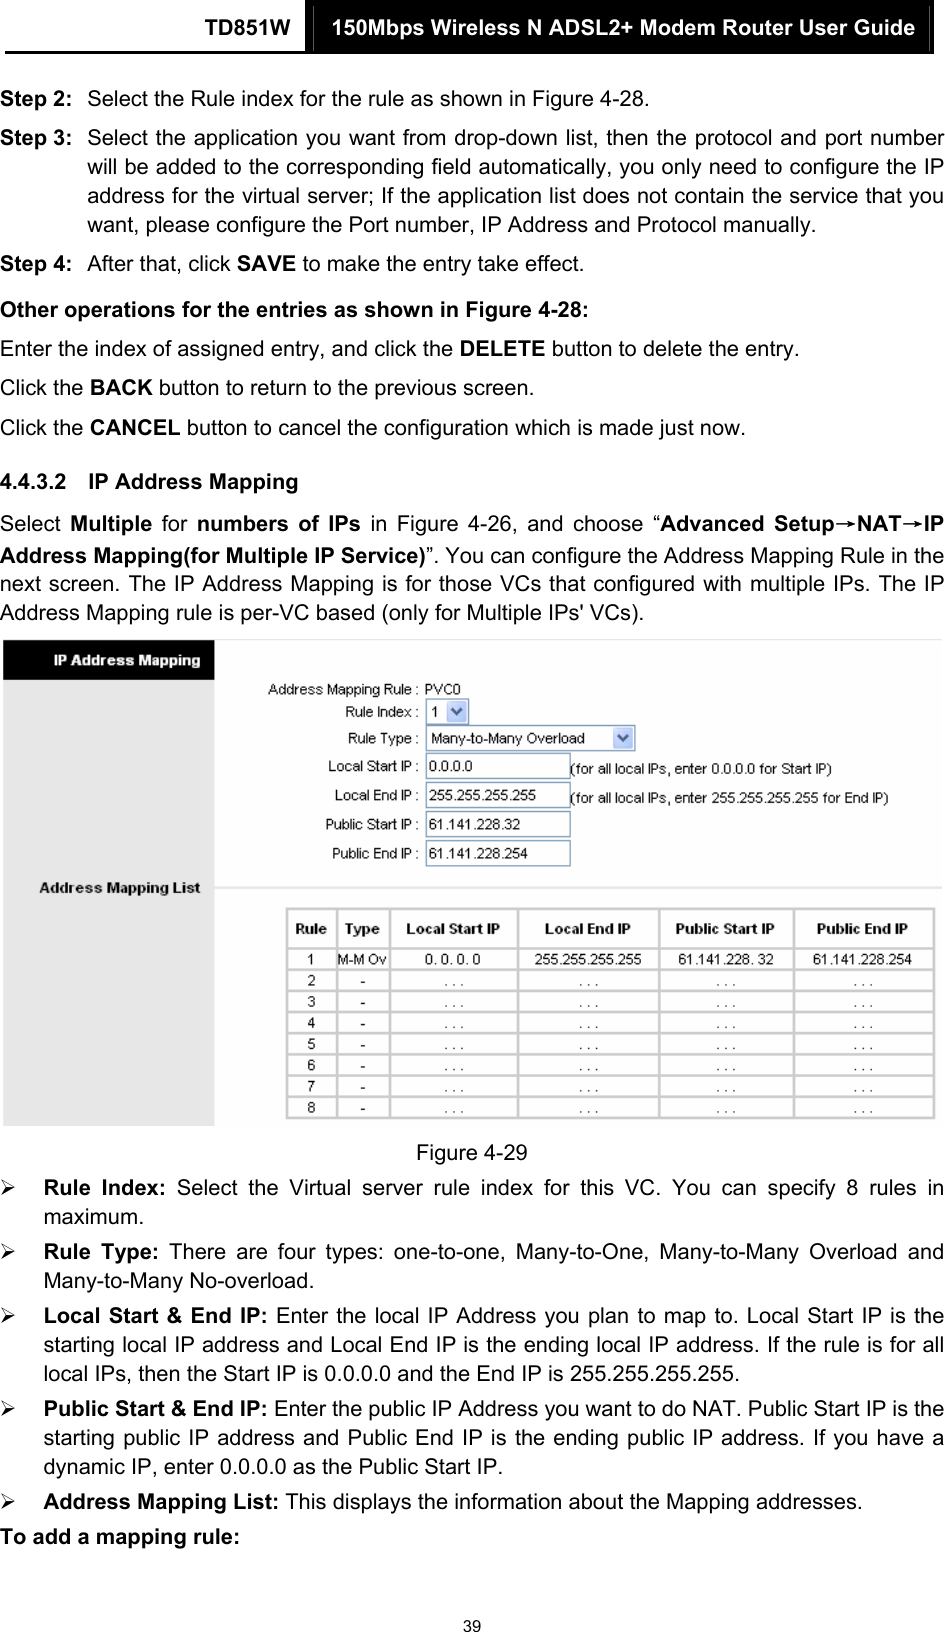 TD851W  150Mbps Wireless N ADSL2+ Modem Router User Guide 39 Step 2:  Select the Rule index for the rule as shown in Figure 4-28. Step 3:  Select the application you want from drop-down list, then the protocol and port number will be added to the corresponding field automatically, you only need to configure the IP address for the virtual server; If the application list does not contain the service that you want, please configure the Port number, IP Address and Protocol manually. Step 4:  After that, click SAVE to make the entry take effect. Other operations for the entries as shown in Figure 4-28: Enter the index of assigned entry, and click the DELETE button to delete the entry. Click the BACK button to return to the previous screen. Click the CANCEL button to cancel the configuration which is made just now. 4.4.3.2  IP Address Mapping Select  Multiple for numbers of IPs in Figure 4-26, and choose “Advanced Setup→NAT→IP Address Mapping(for Multiple IP Service)”. You can configure the Address Mapping Rule in the next screen. The IP Address Mapping is for those VCs that configured with multiple IPs. The IP Address Mapping rule is per-VC based (only for Multiple IPs&apos; VCs).  Figure 4-29 ¾ Rule Index: Select the Virtual server rule index for this VC. You can specify 8 rules in maximum.  ¾ Rule Type: There are four types: one-to-one, Many-to-One, Many-to-Many Overload and Many-to-Many No-overload. ¾ Local Start &amp; End IP: Enter the local IP Address you plan to map to. Local Start IP is the starting local IP address and Local End IP is the ending local IP address. If the rule is for all local IPs, then the Start IP is 0.0.0.0 and the End IP is 255.255.255.255.   ¾ Public Start &amp; End IP: Enter the public IP Address you want to do NAT. Public Start IP is the starting public IP address and Public End IP is the ending public IP address. If you have a dynamic IP, enter 0.0.0.0 as the Public Start IP. ¾ Address Mapping List: This displays the information about the Mapping addresses. To add a mapping rule:   